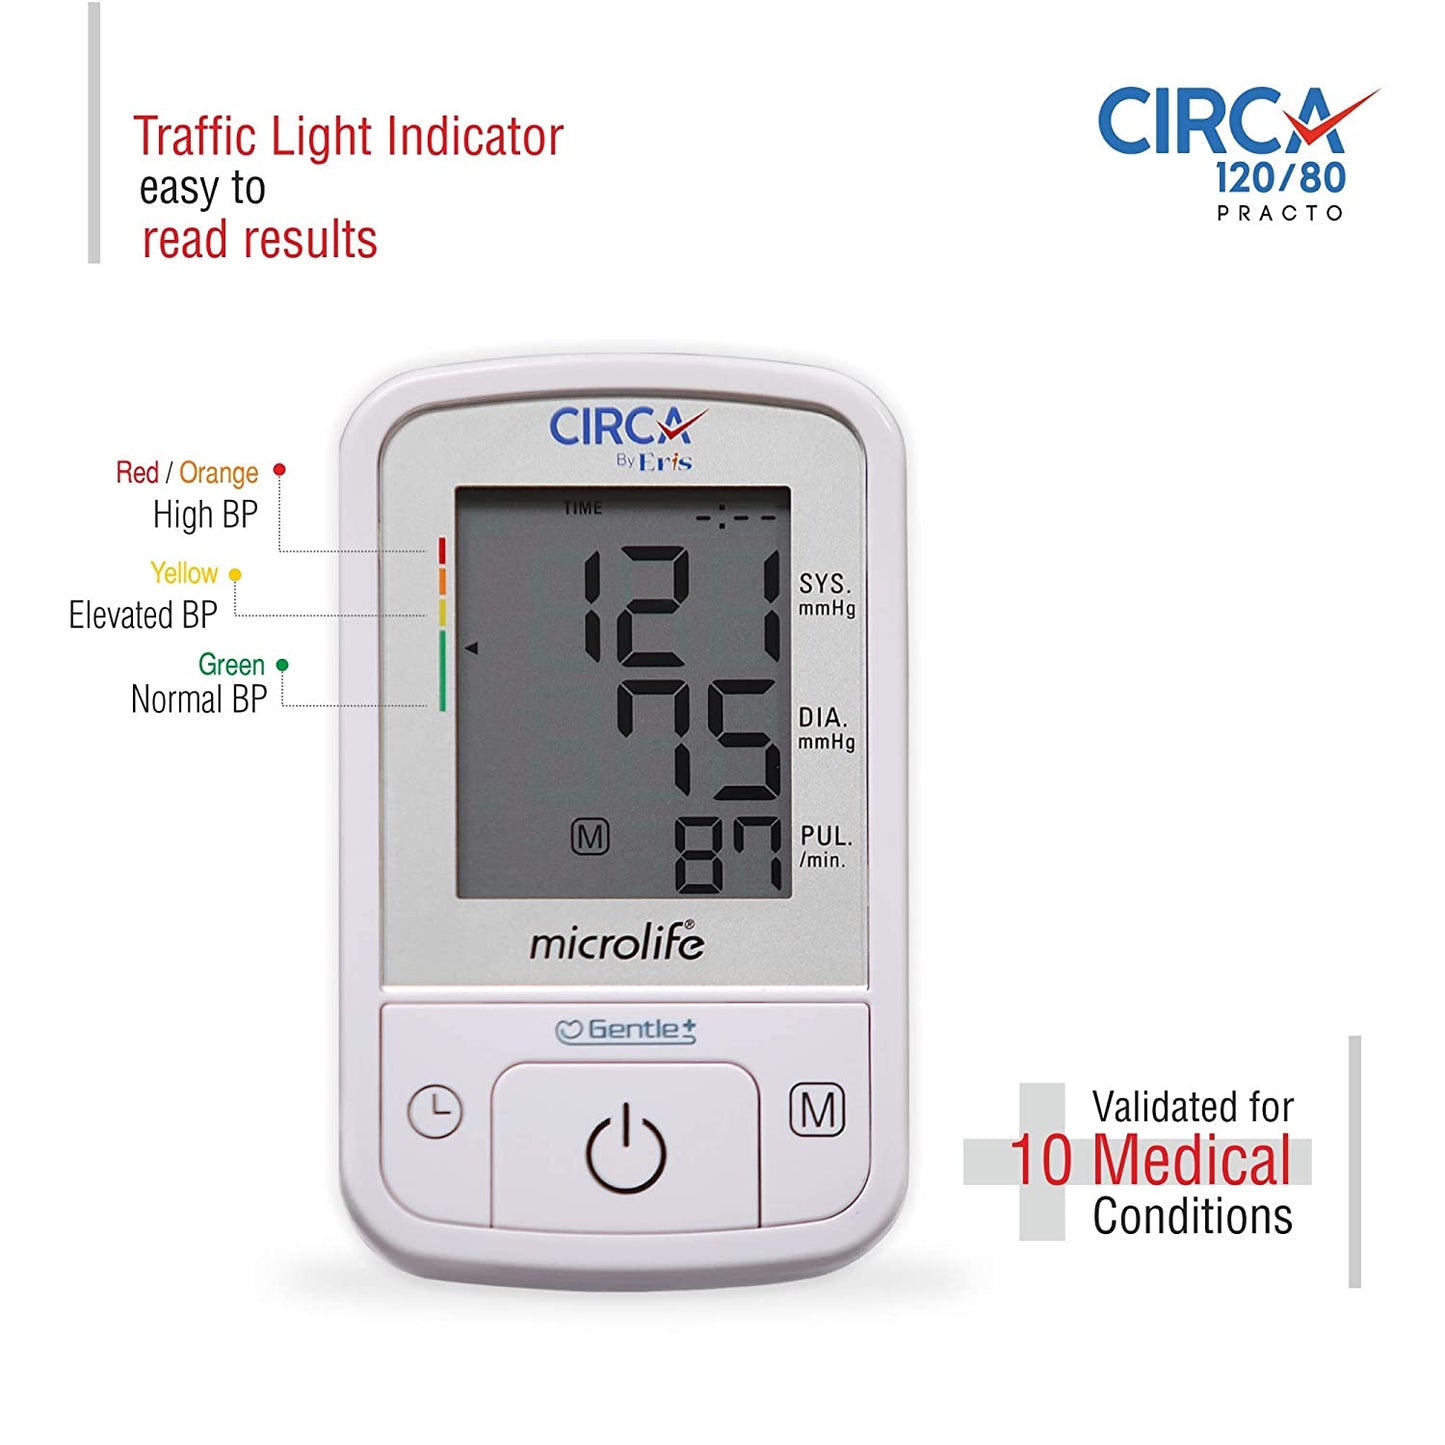 Circa Practo 120/80 - Blood Pressure Monitor for Home Use